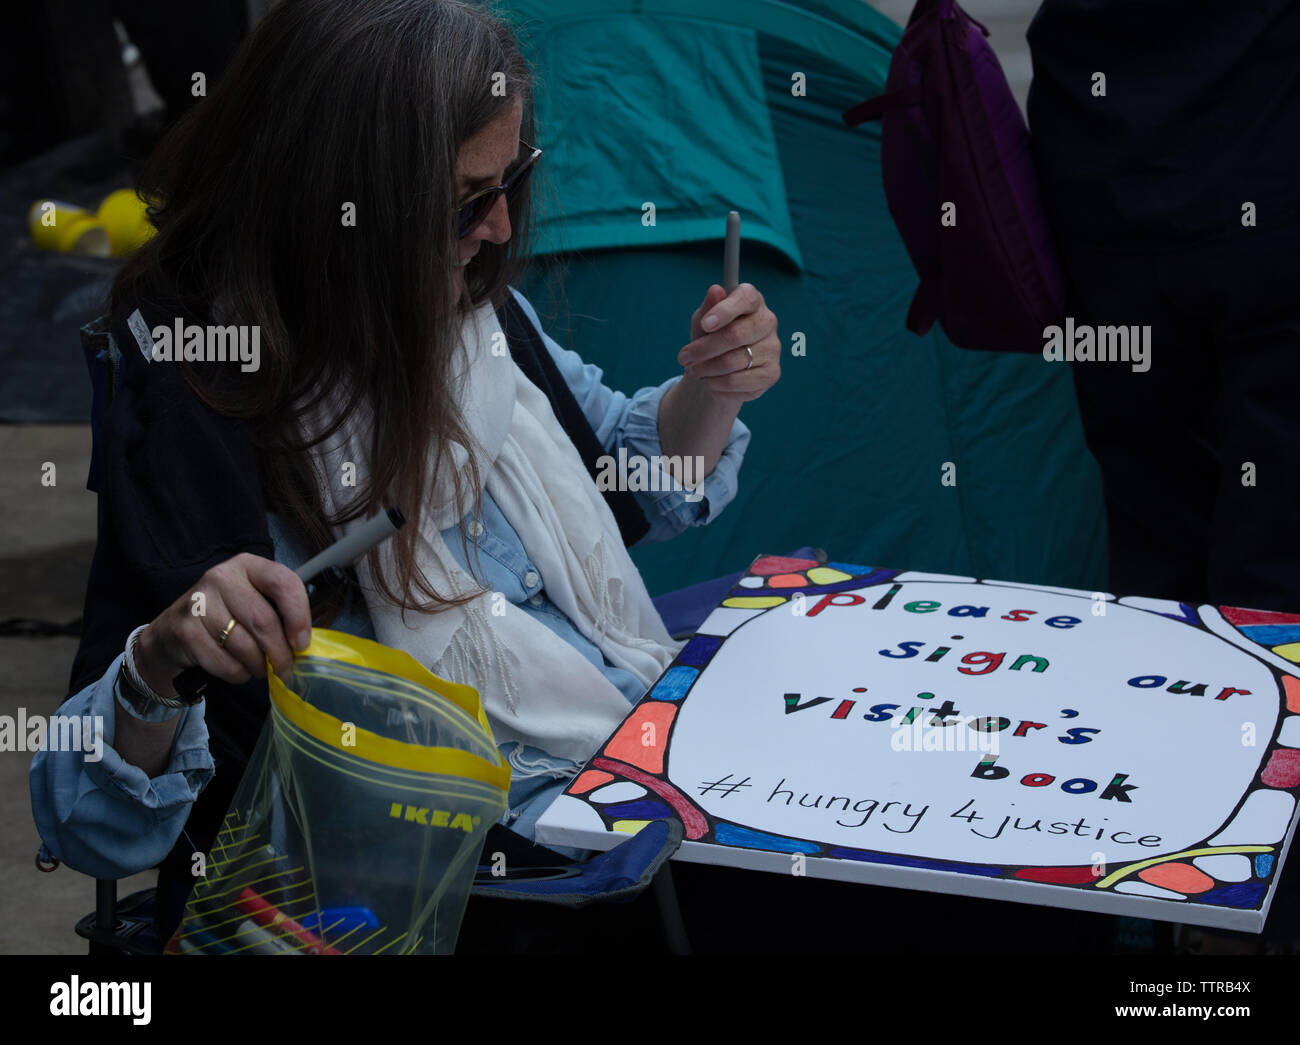 London, UK. 17th June 2019. Supporter of Richard Ratcliffe. who is on hunger strike in front of the Iranian embassy in London in protest of the detention of his wife Nazanin Zaghari in Iran over spying allegations. Credit: Joe Kuis / Alamy Stock Photo